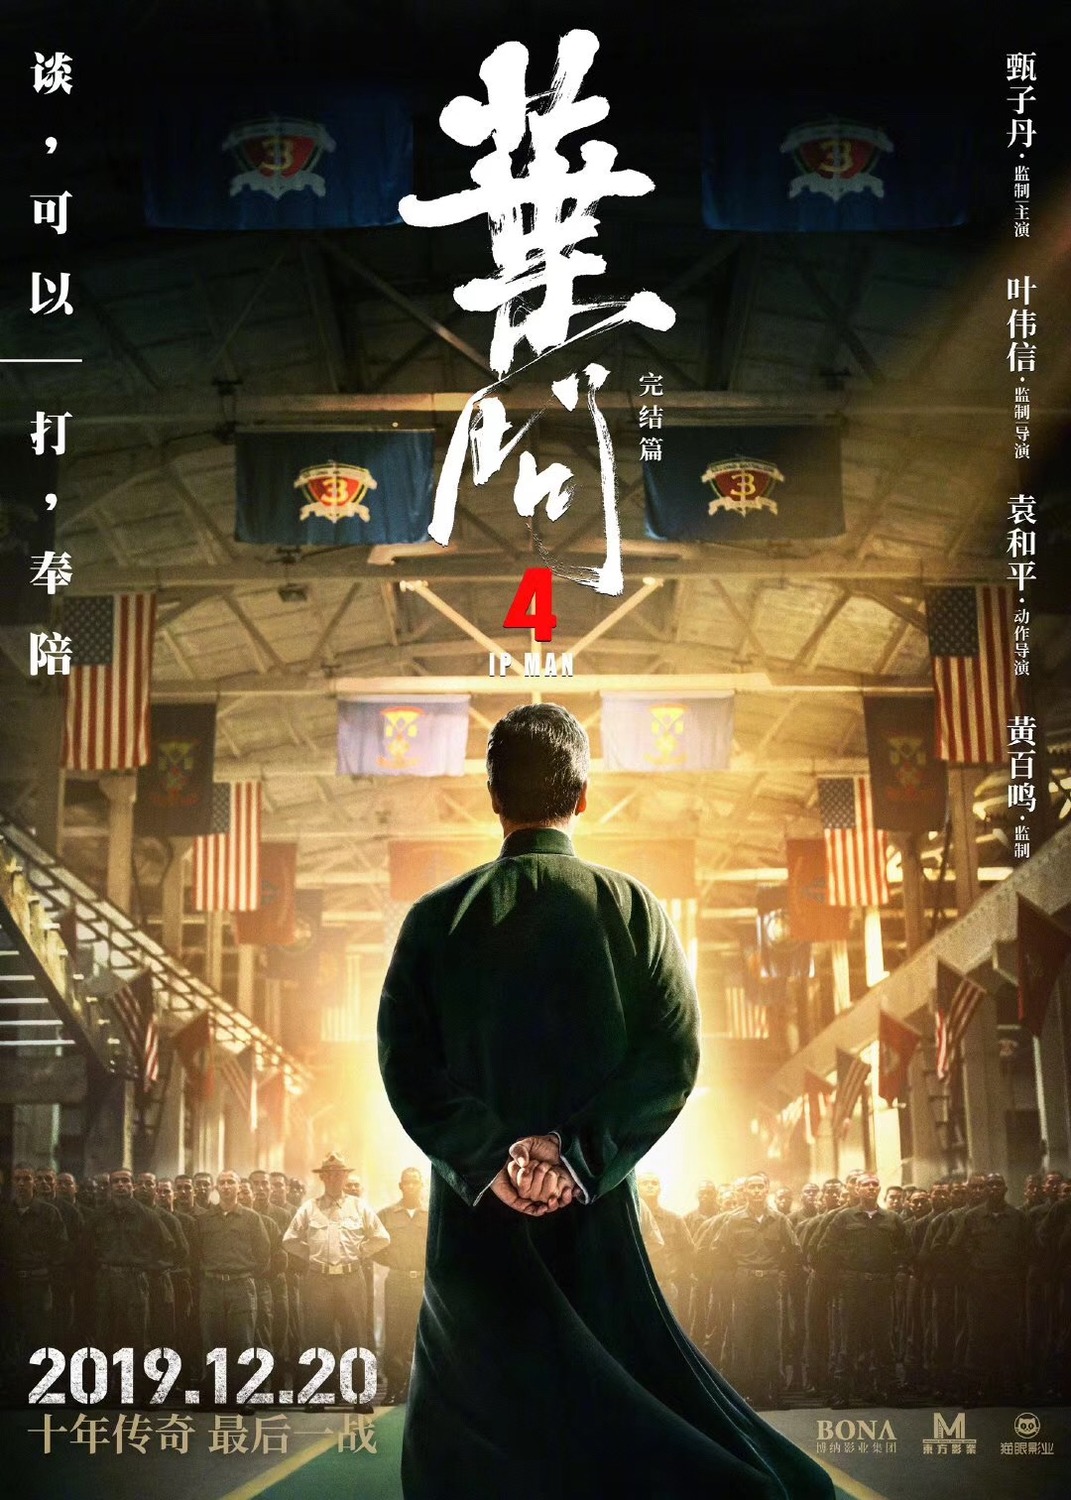 Extra Large Movie Poster Image for Yip Man 4 (#2 of 15)